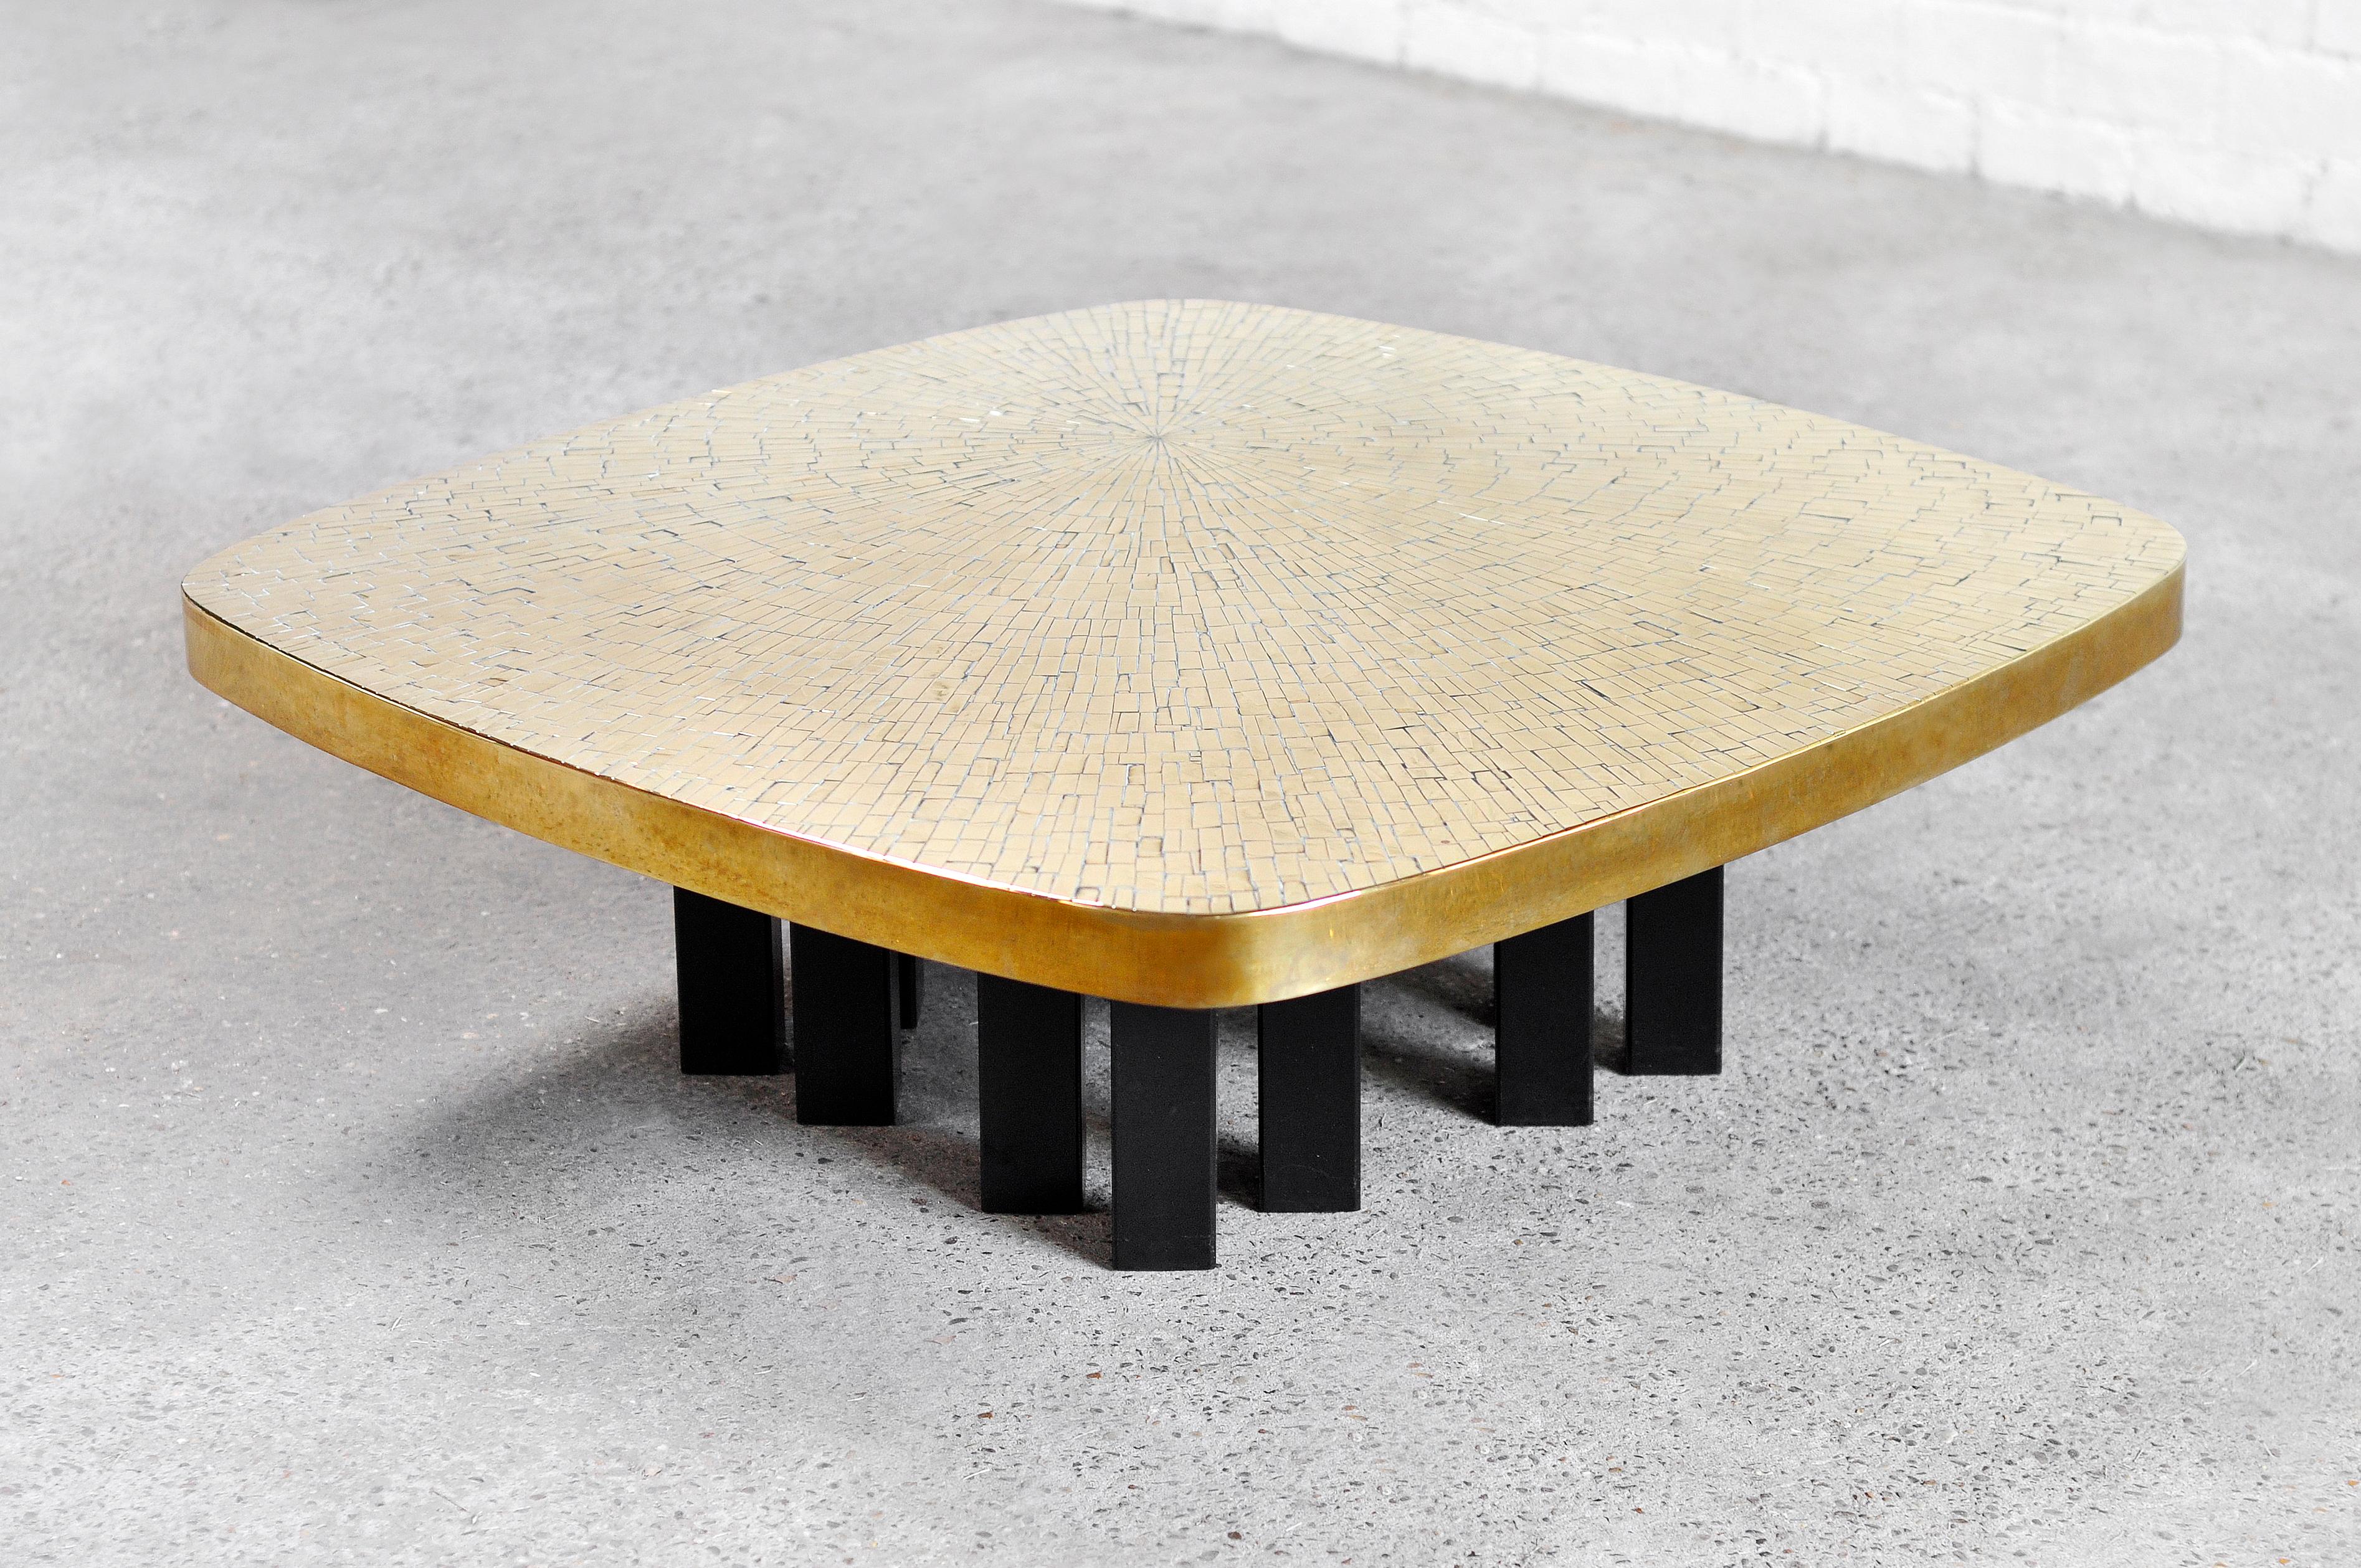 An exclusive coffee table designed and created in the workshop of Marcel and Jean-Claude Dresse in the 1970’s. The tabletop features a beautiful fragmented surface with an inlaid gilt brass mosaic. The rounded square plate sits on top of a structure